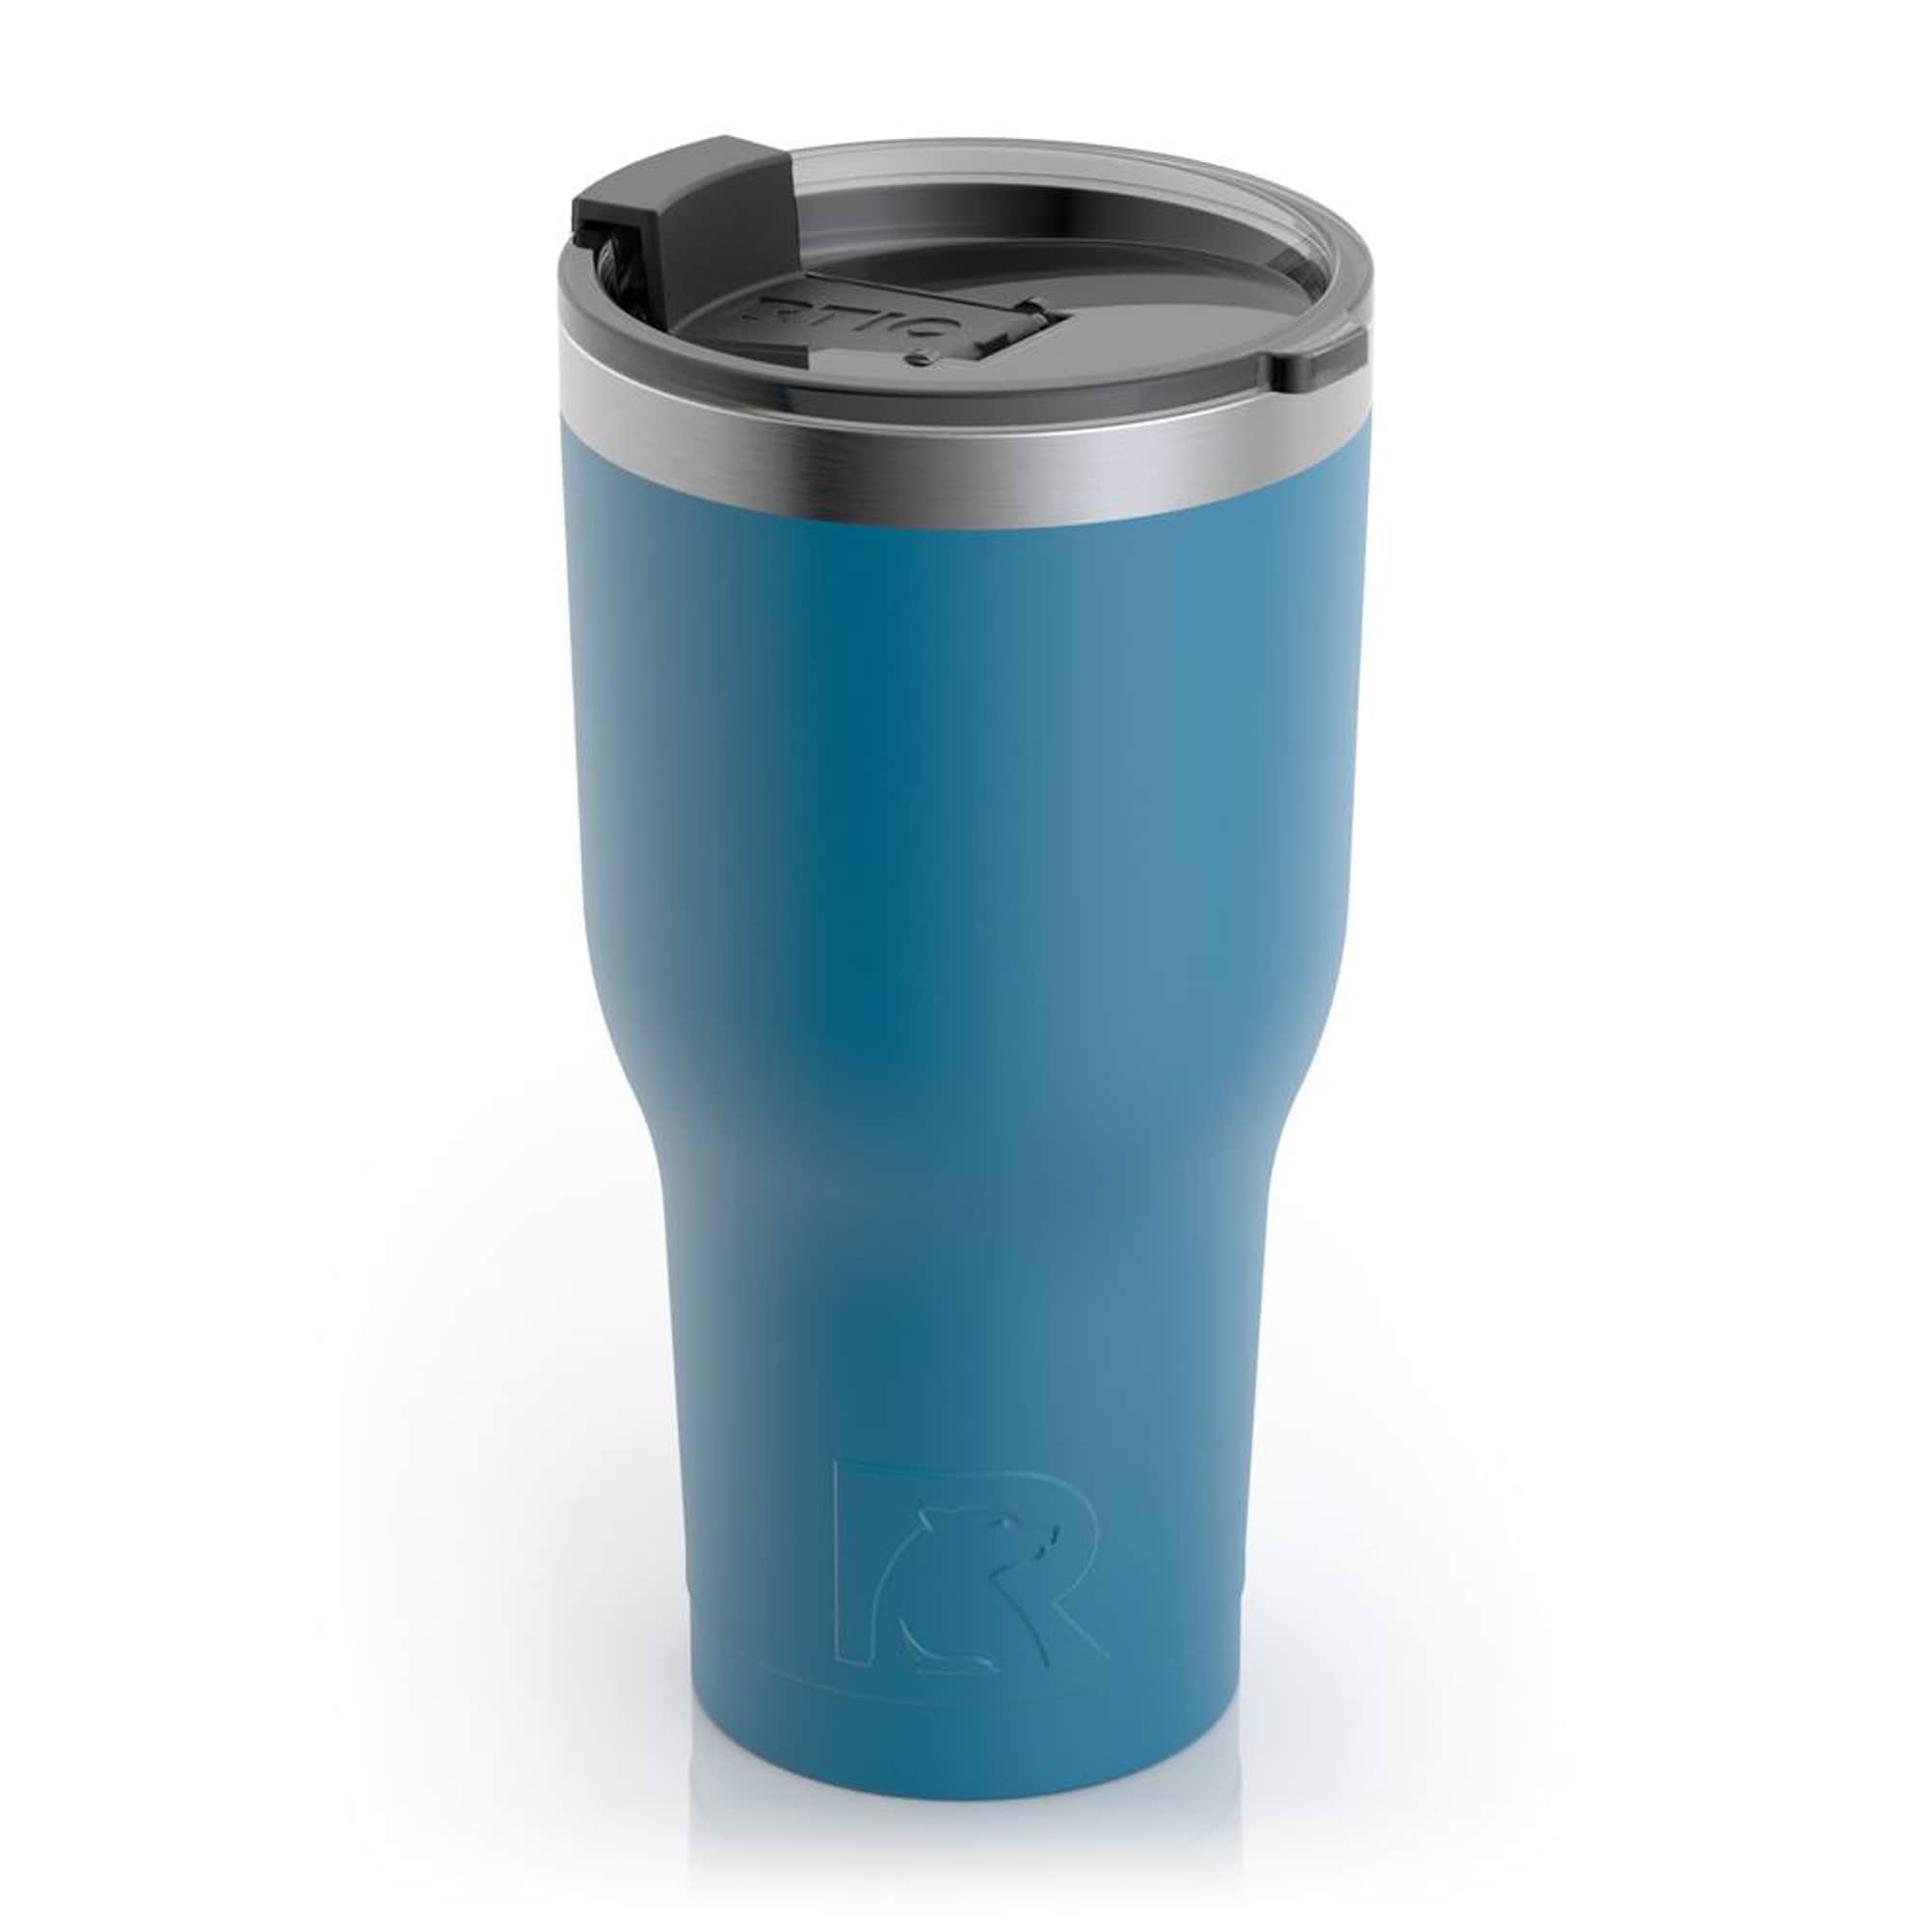 Life Is Good Wake Up Campfire 30 oz Stainless Steel Tumbler with Lid